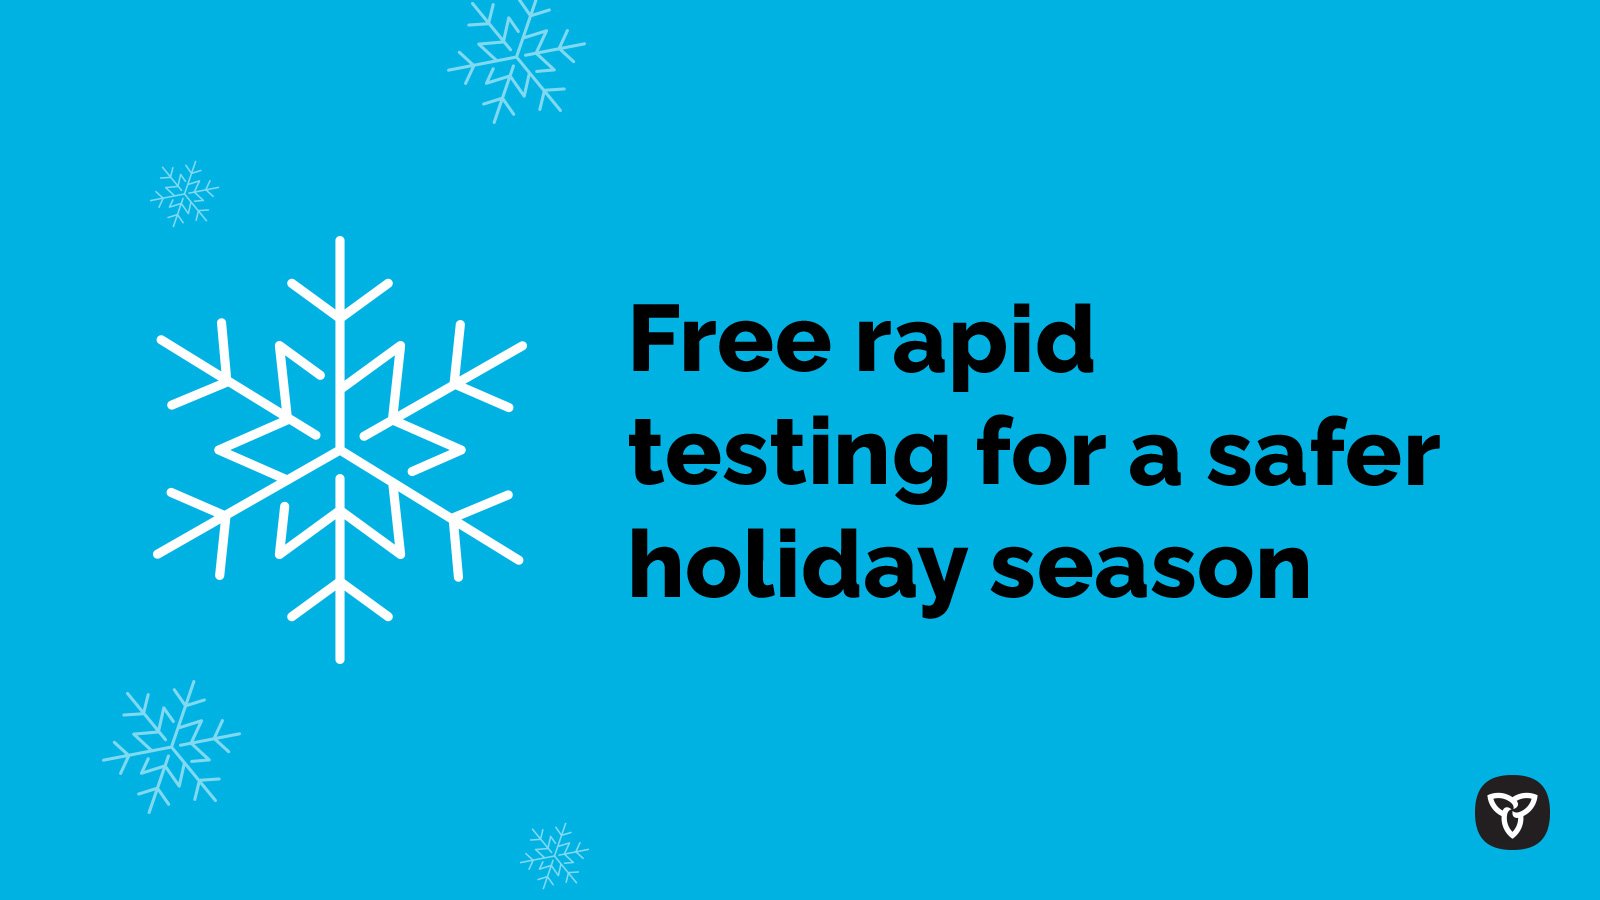 Infographic for holiday free antigen testing